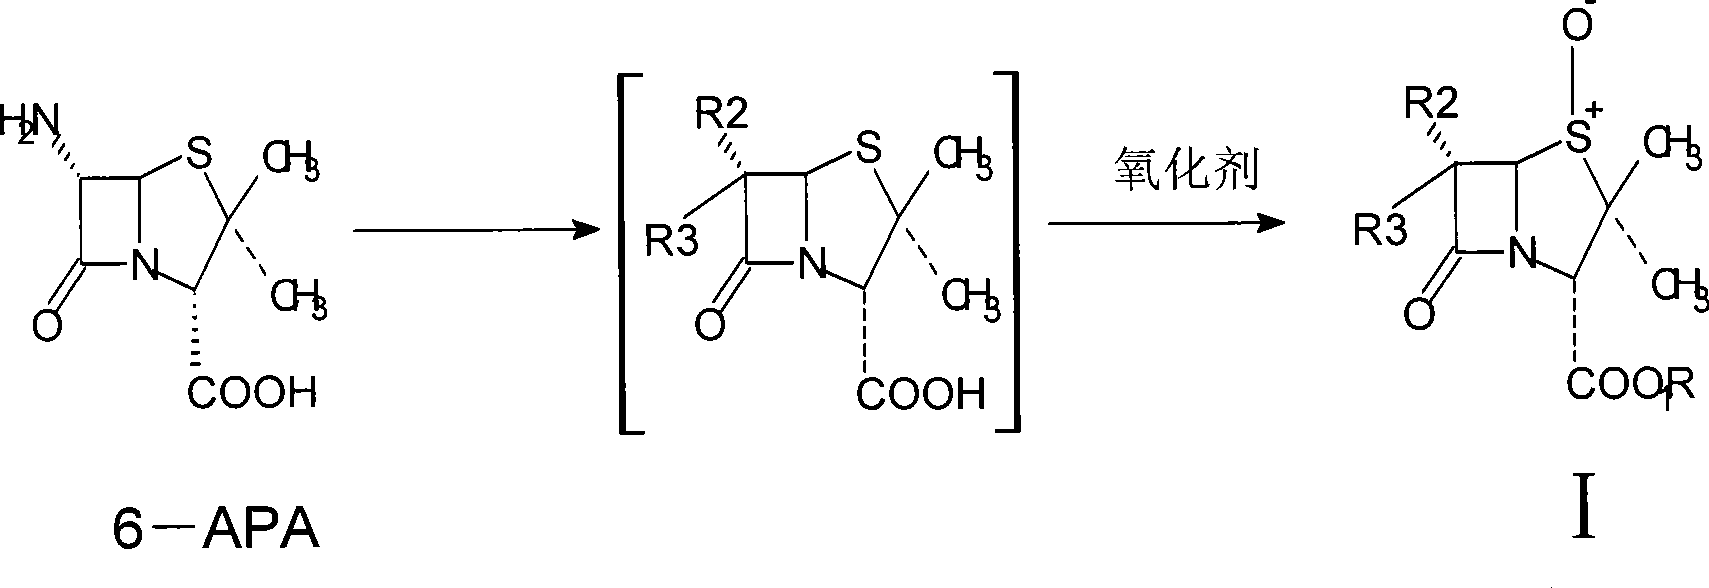 Catalytic oxidation system and use thereof in tazobactam synthesis